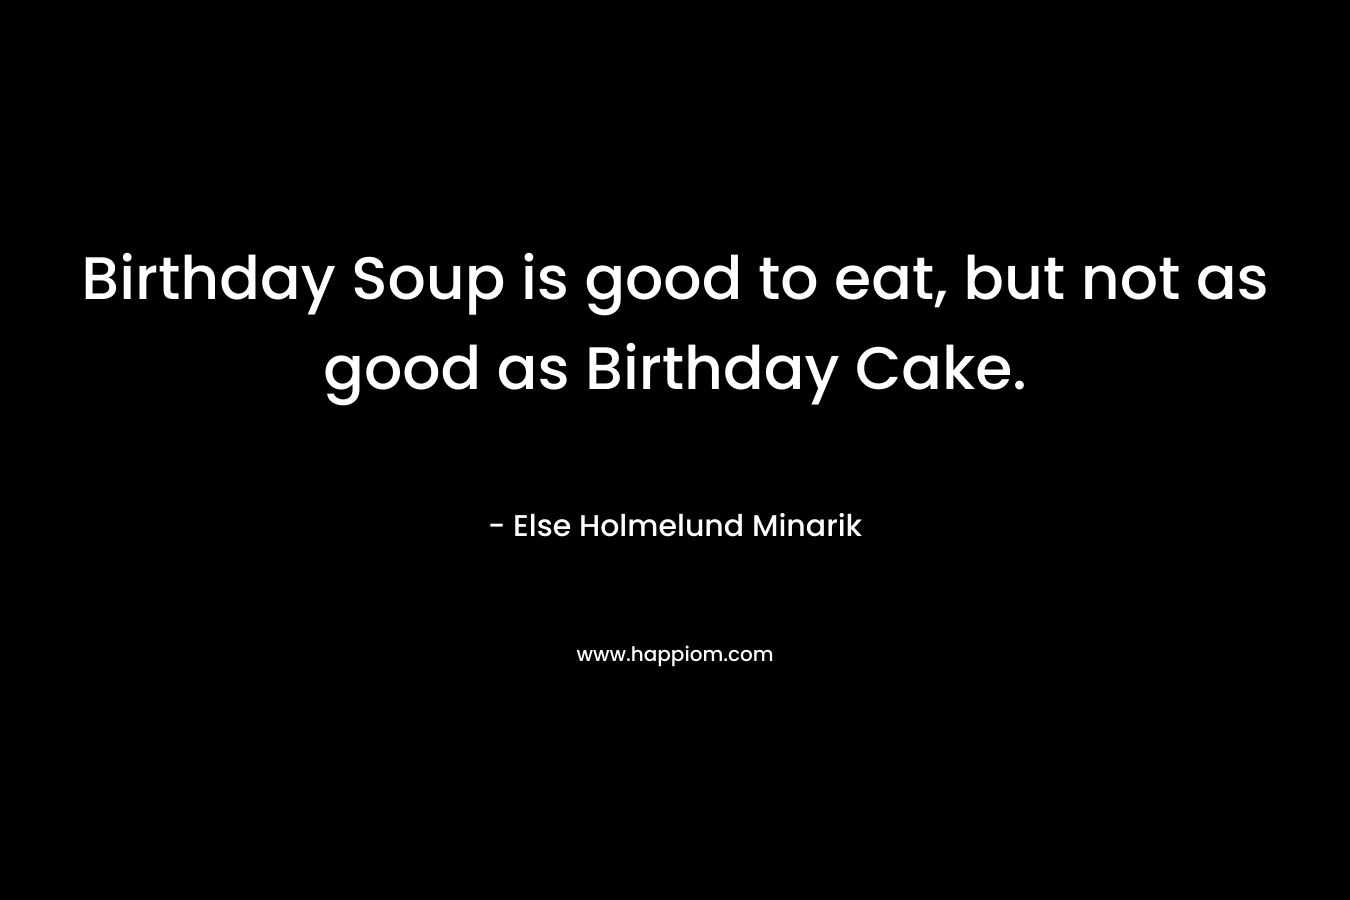 Birthday Soup is good to eat, but not as good as Birthday Cake.